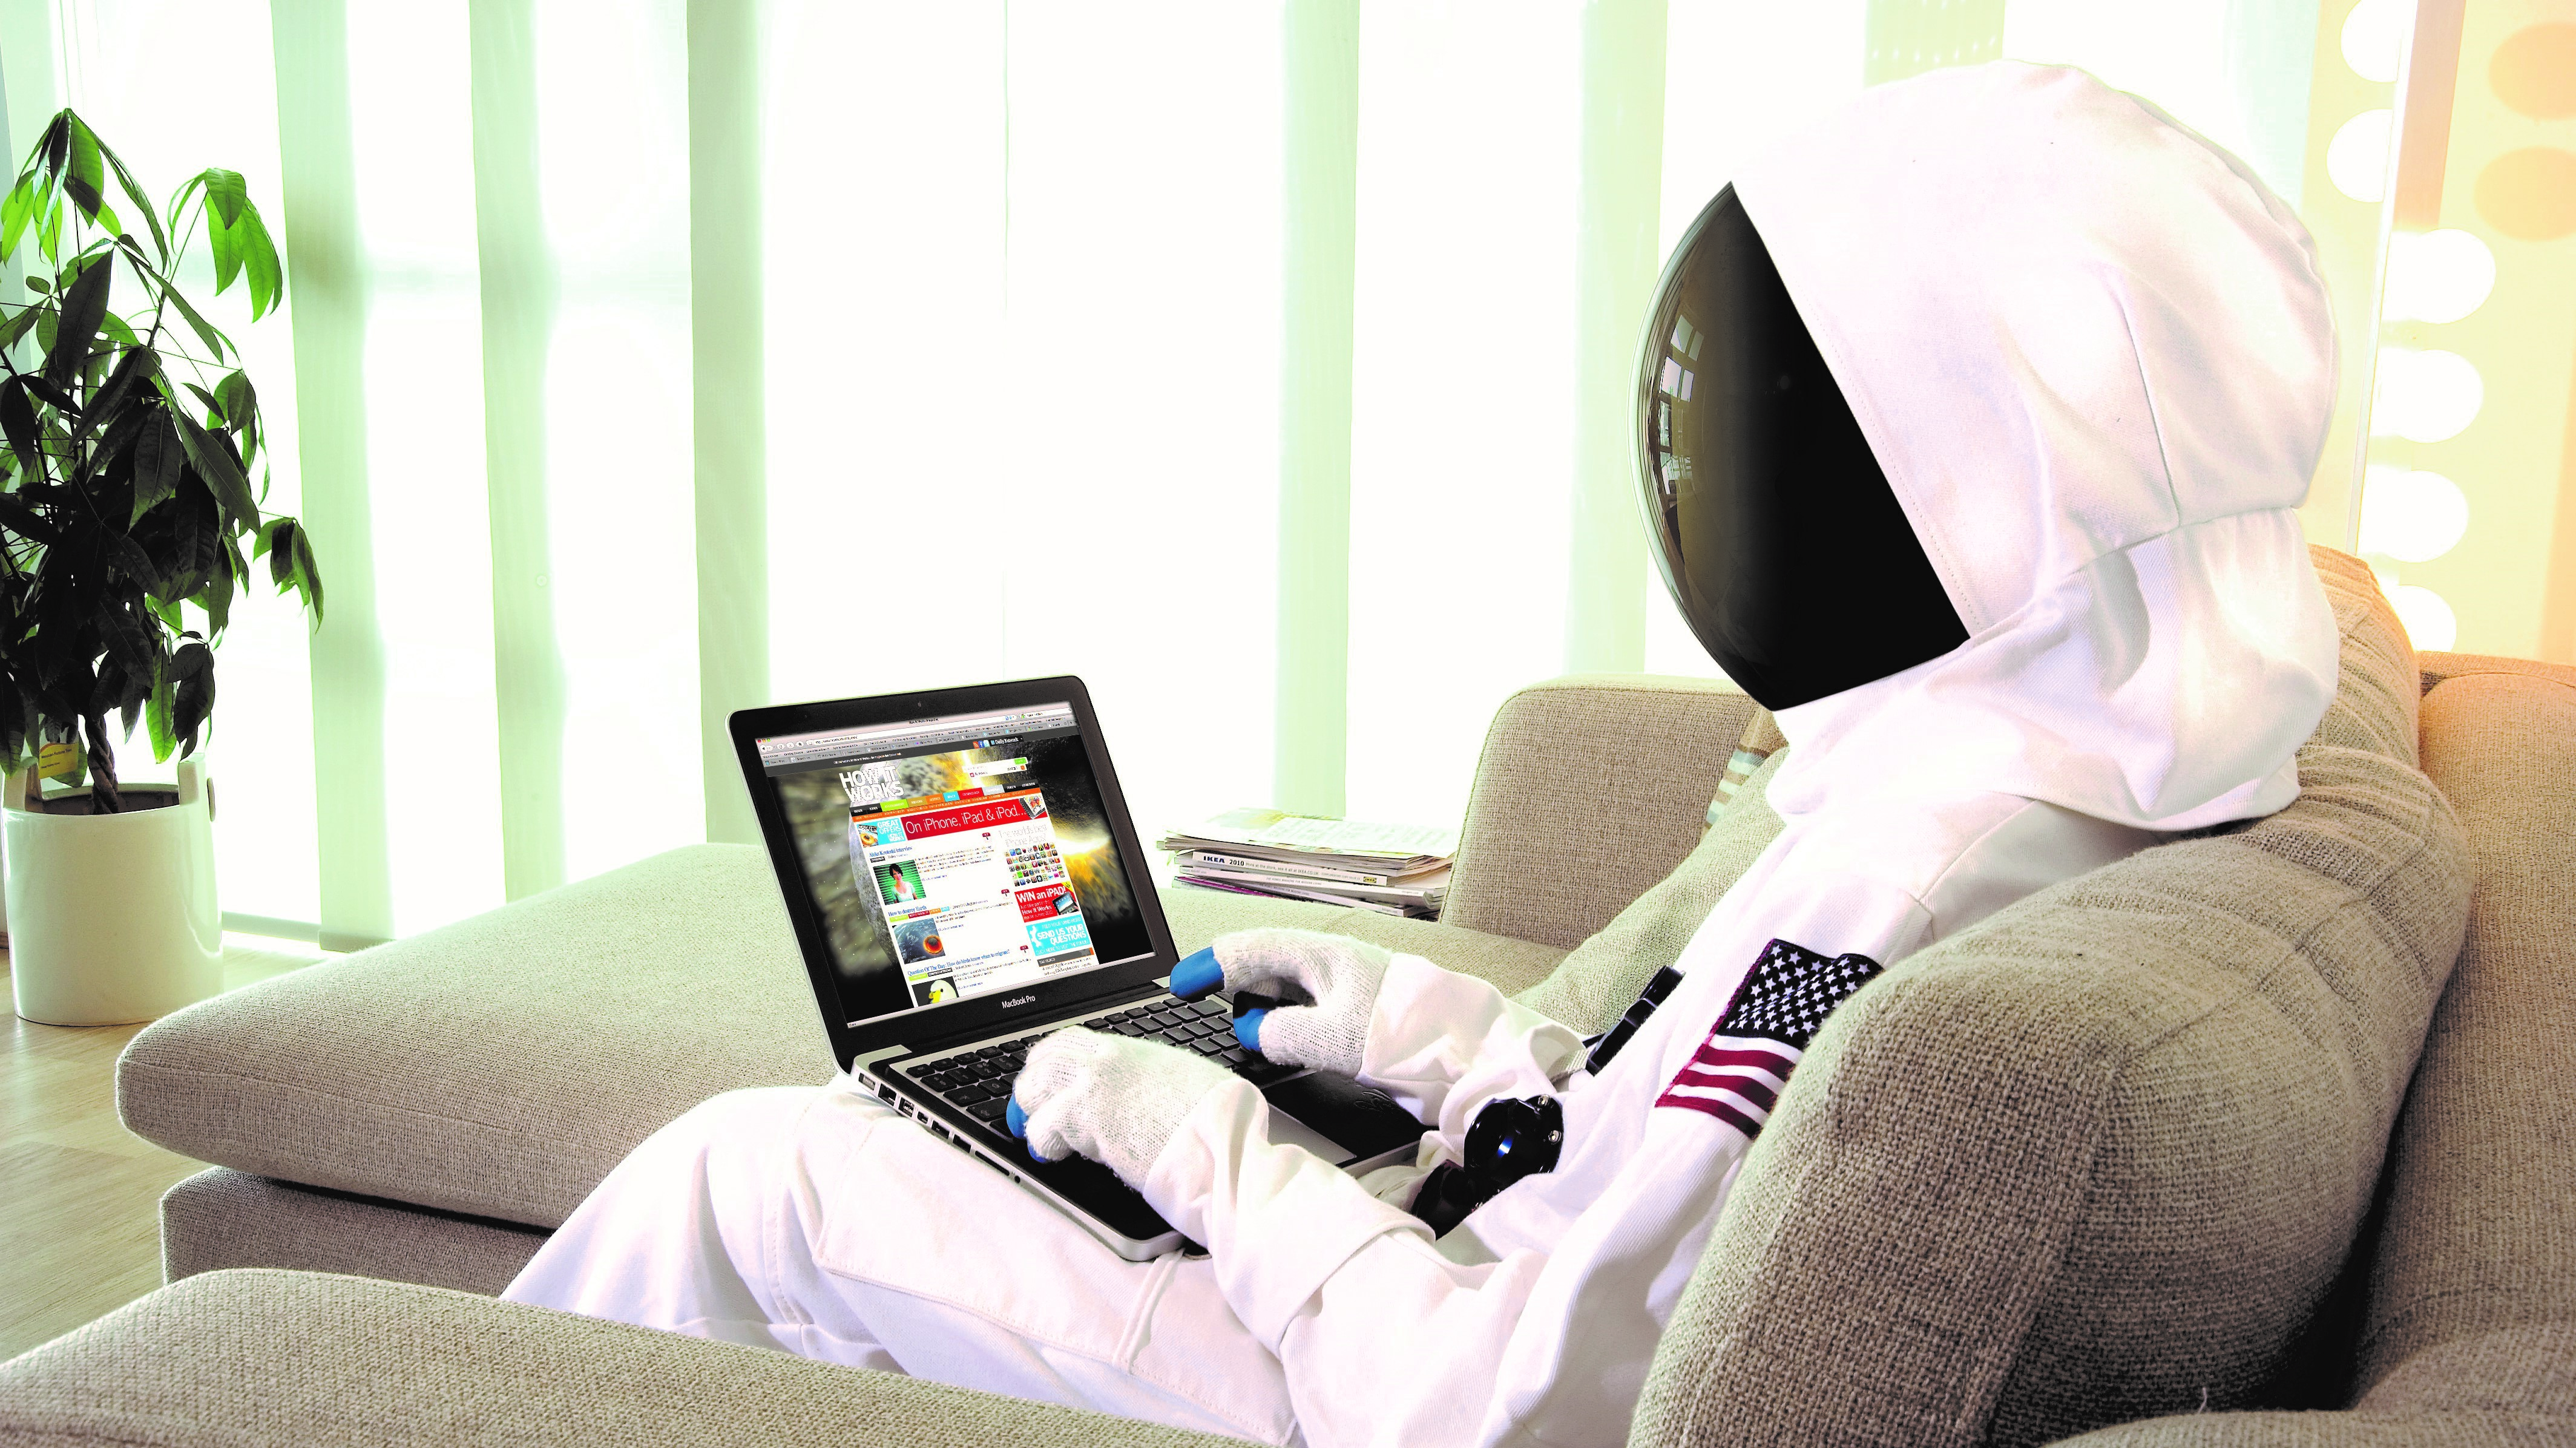 person dressed as an astronaut uses a laptop while sitting on a couch.